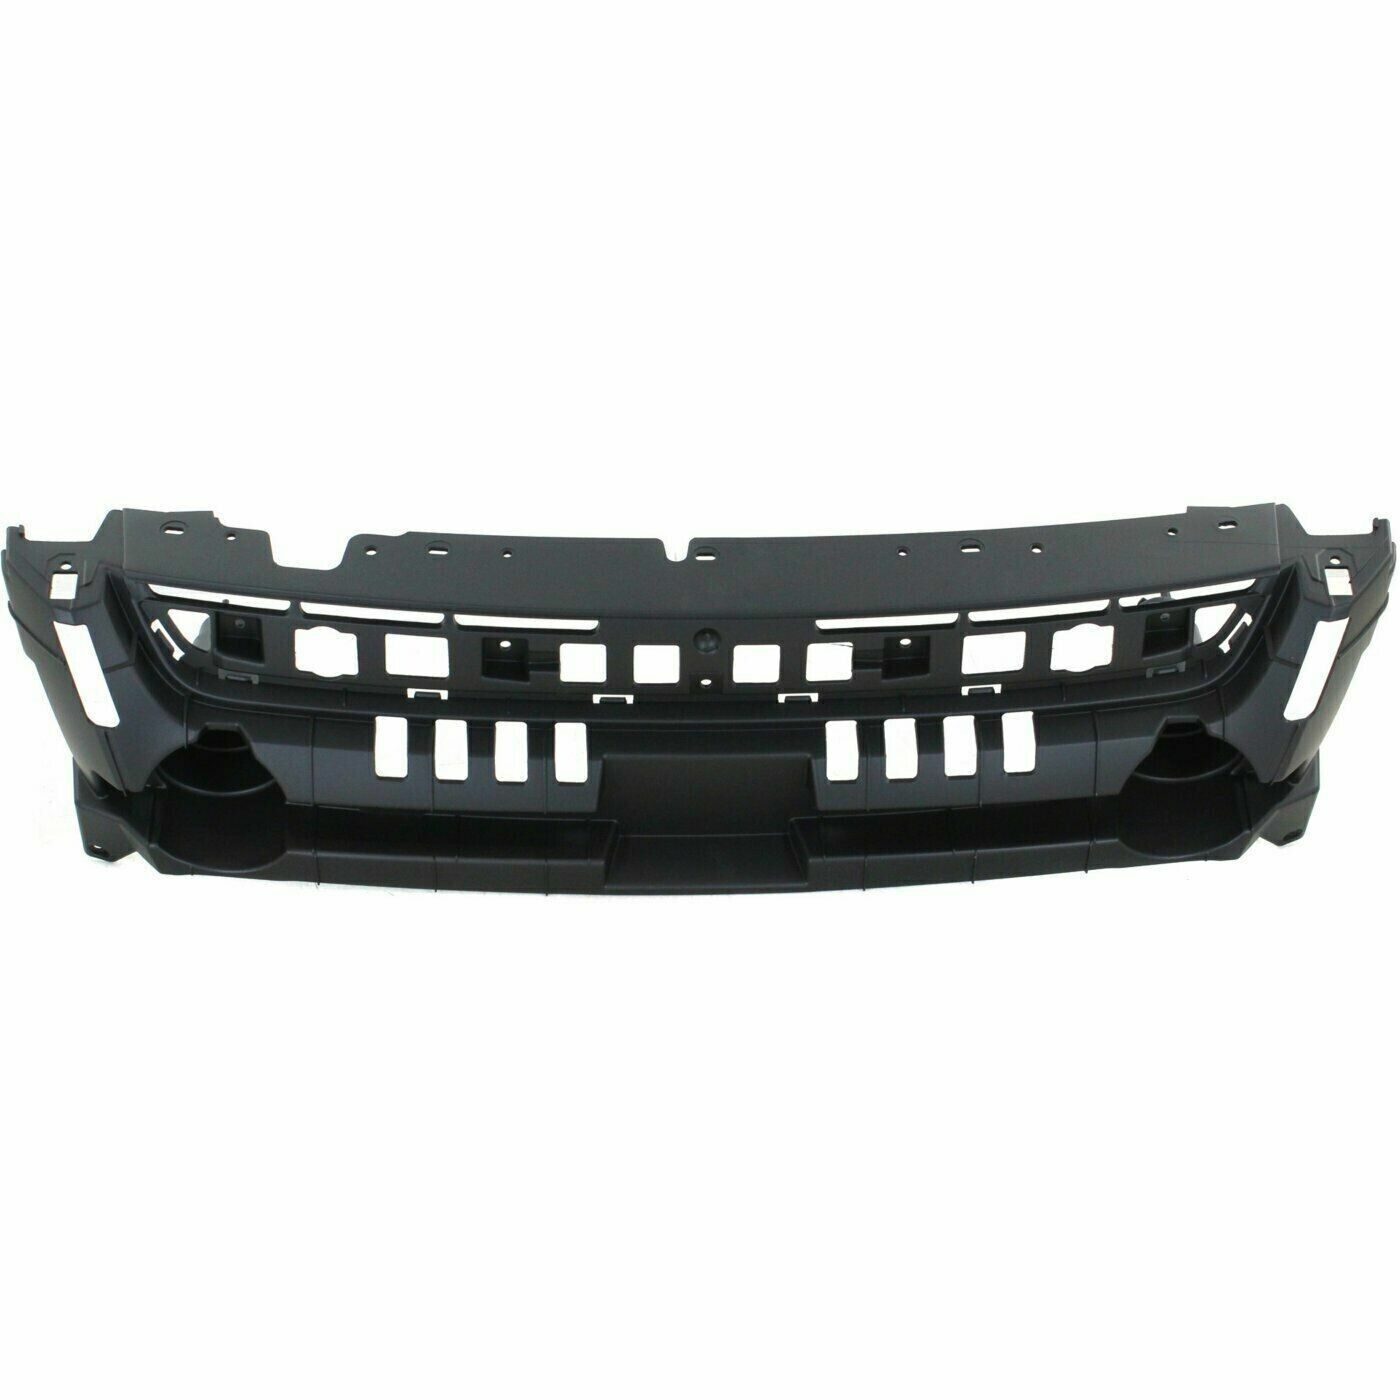 NEW Front Grille Mounting Panel For 2013-2016 Ford Escape SHIPS TODAY